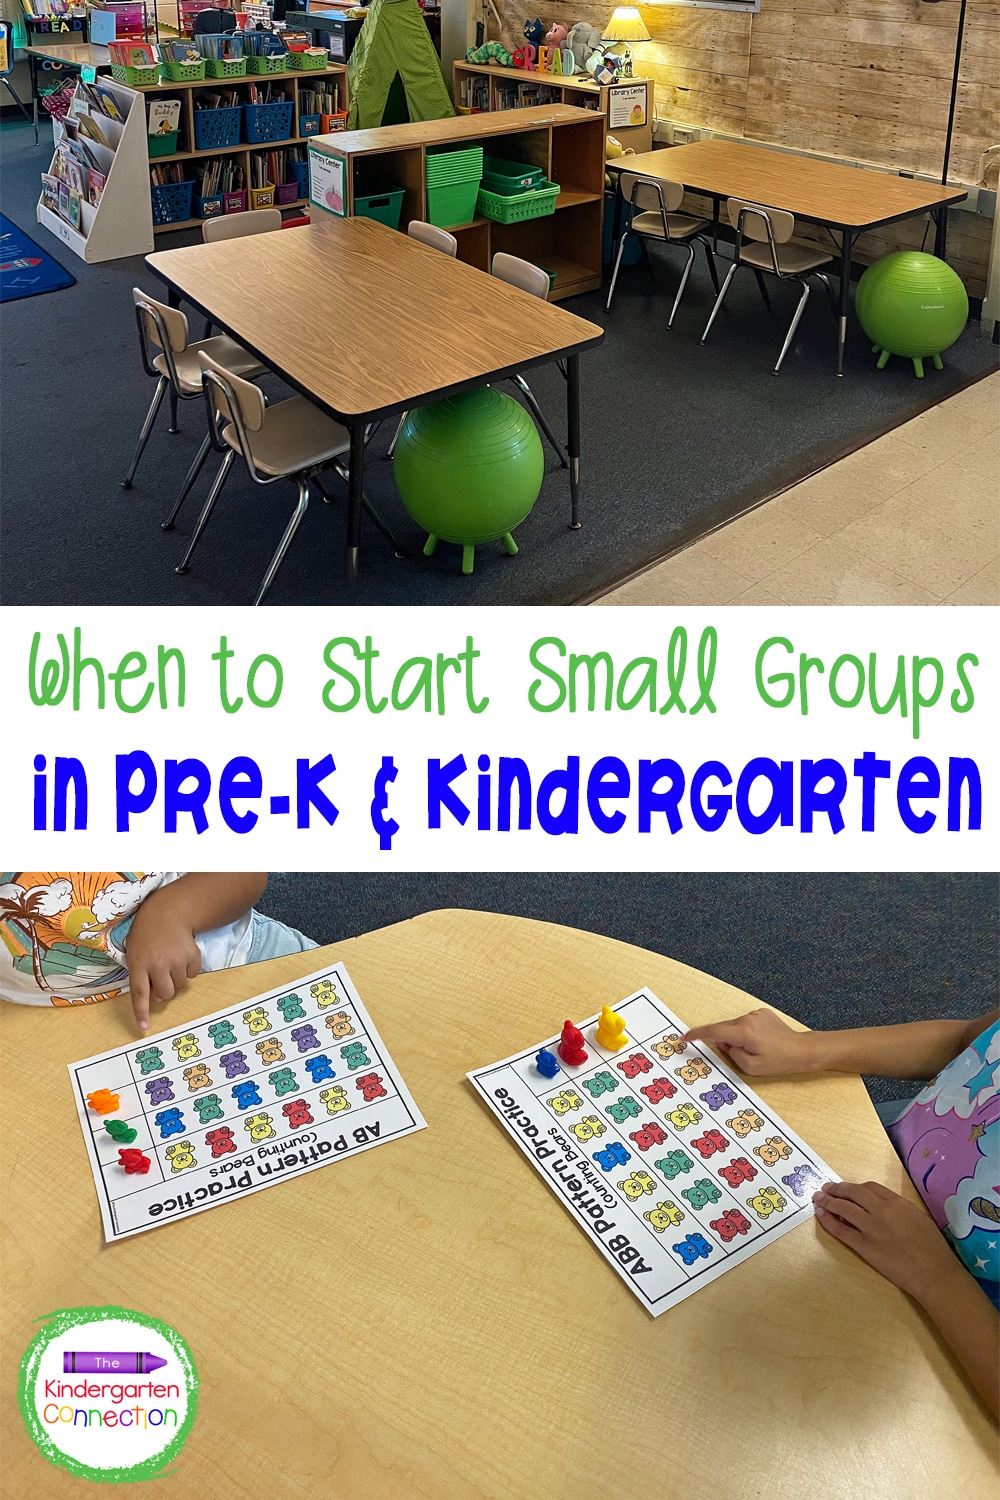 Knowing when to start small groups in Pre-K & Kindergarten can be tricky. Check out the steps I take to start them in my classroom and why!